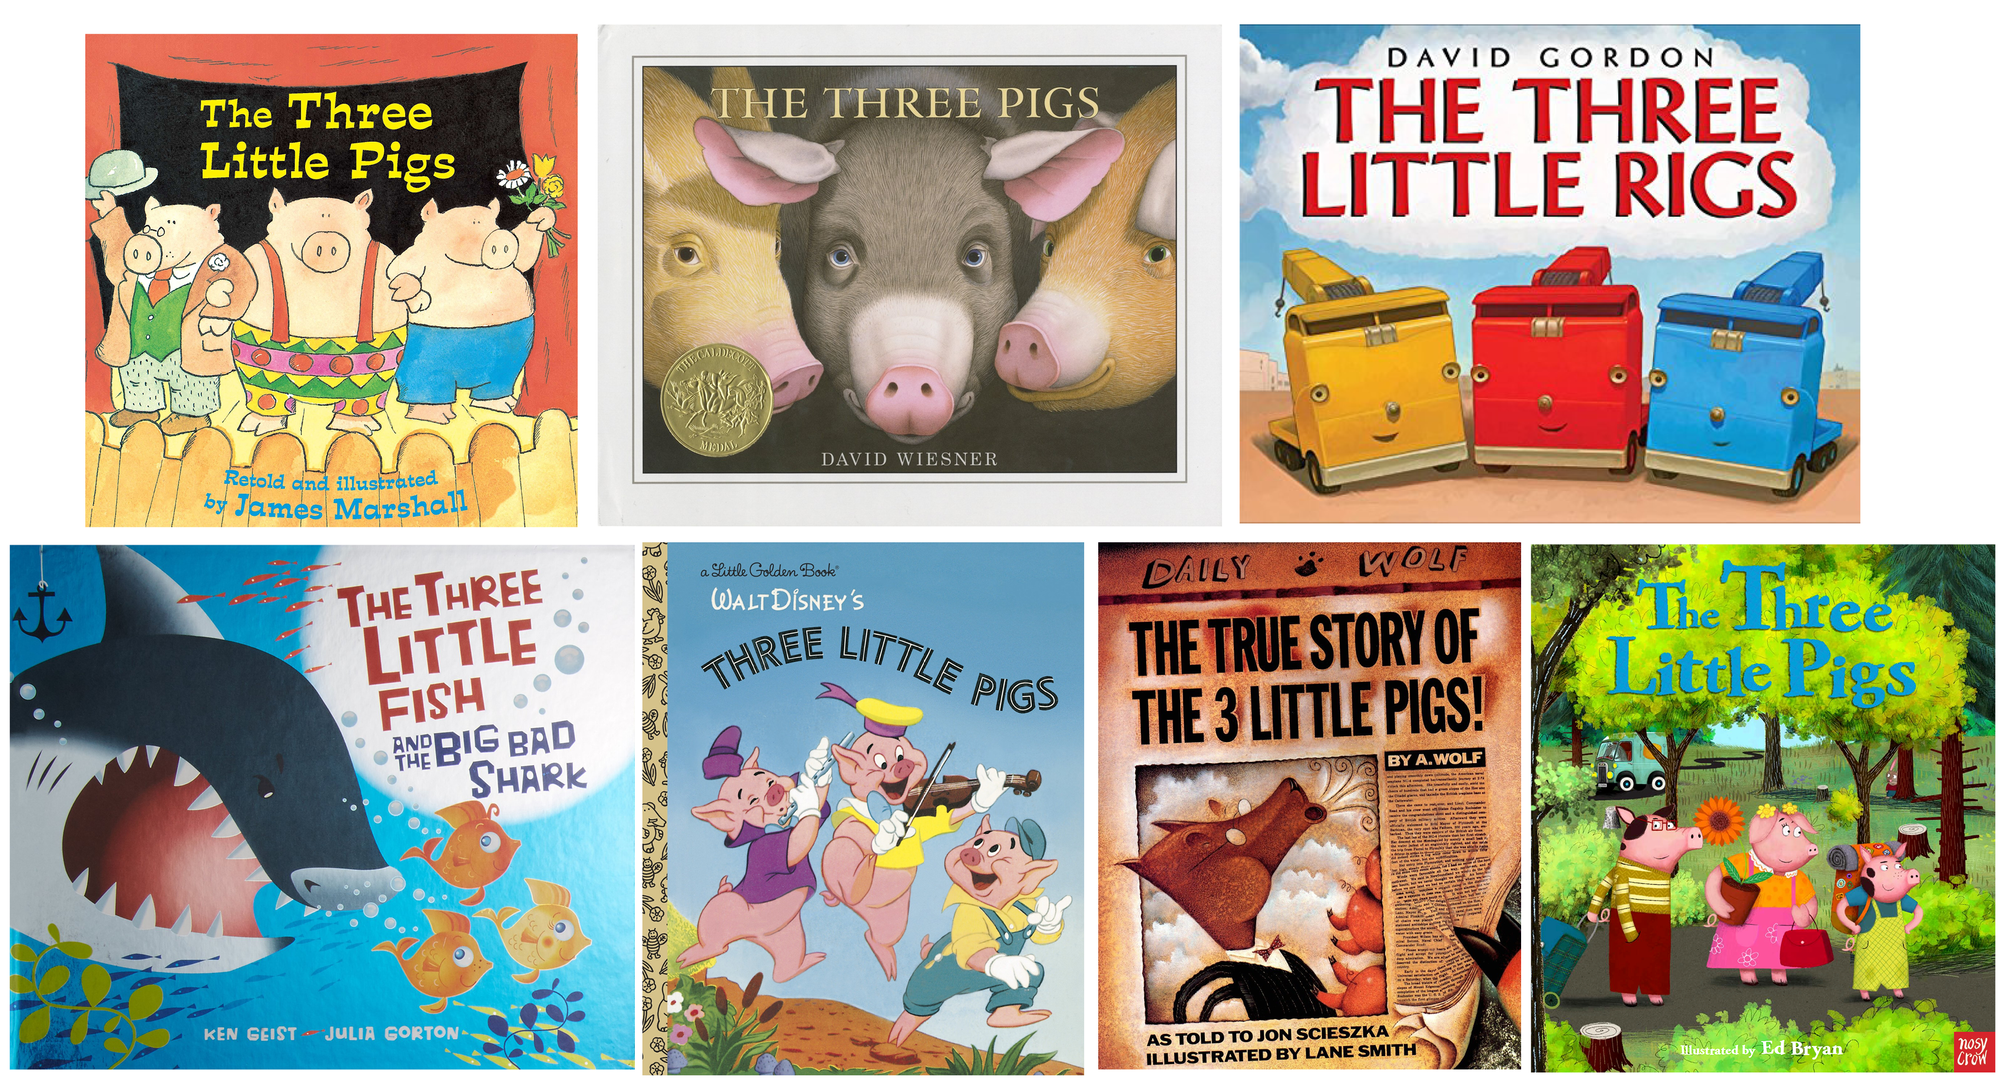 Fairy Tales & Fables Part 1: Little Red Riding Hood, The Three Billy Goats Gruff, & The Three Little Pigs